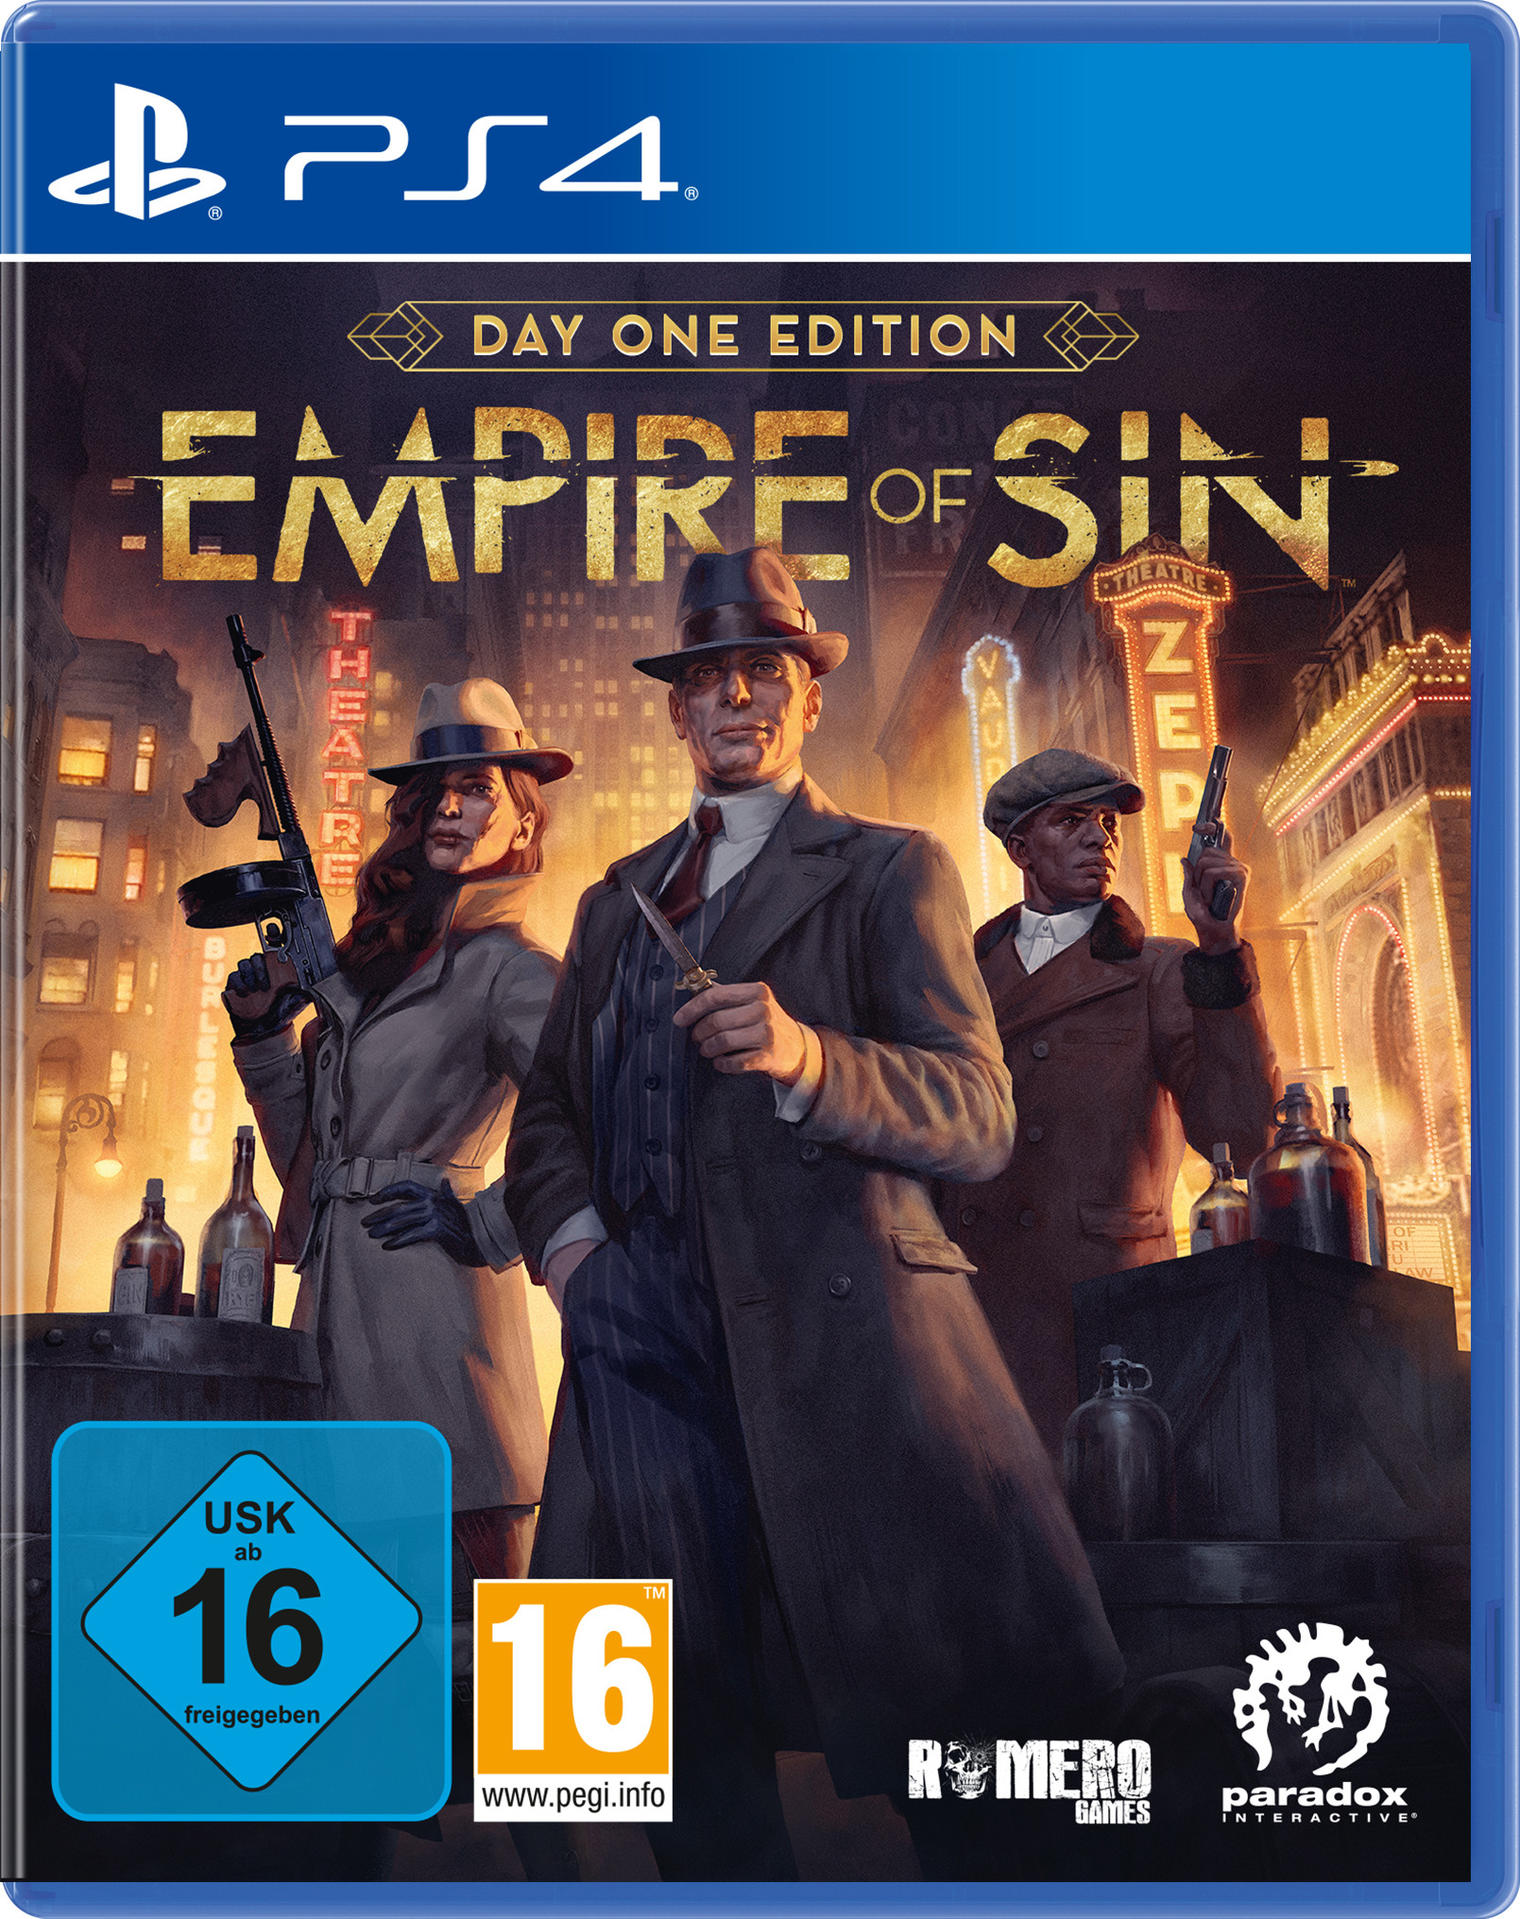 OF EMPIRE EDITION) (DAY - 4] PS4 [PlayStation ONE SIN